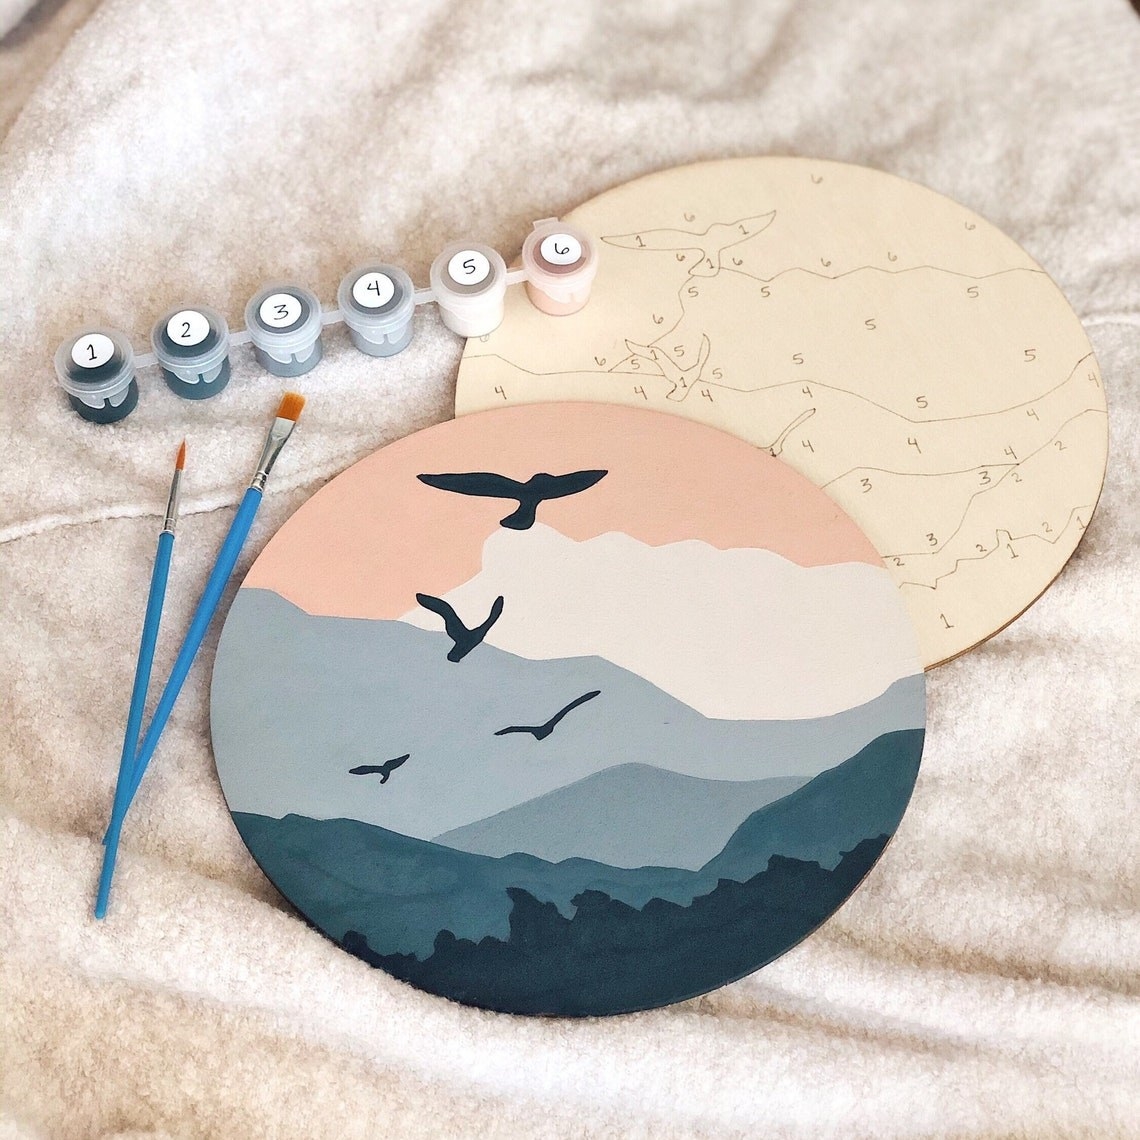 a round wooden plaque with a design outlined on it and paints to use